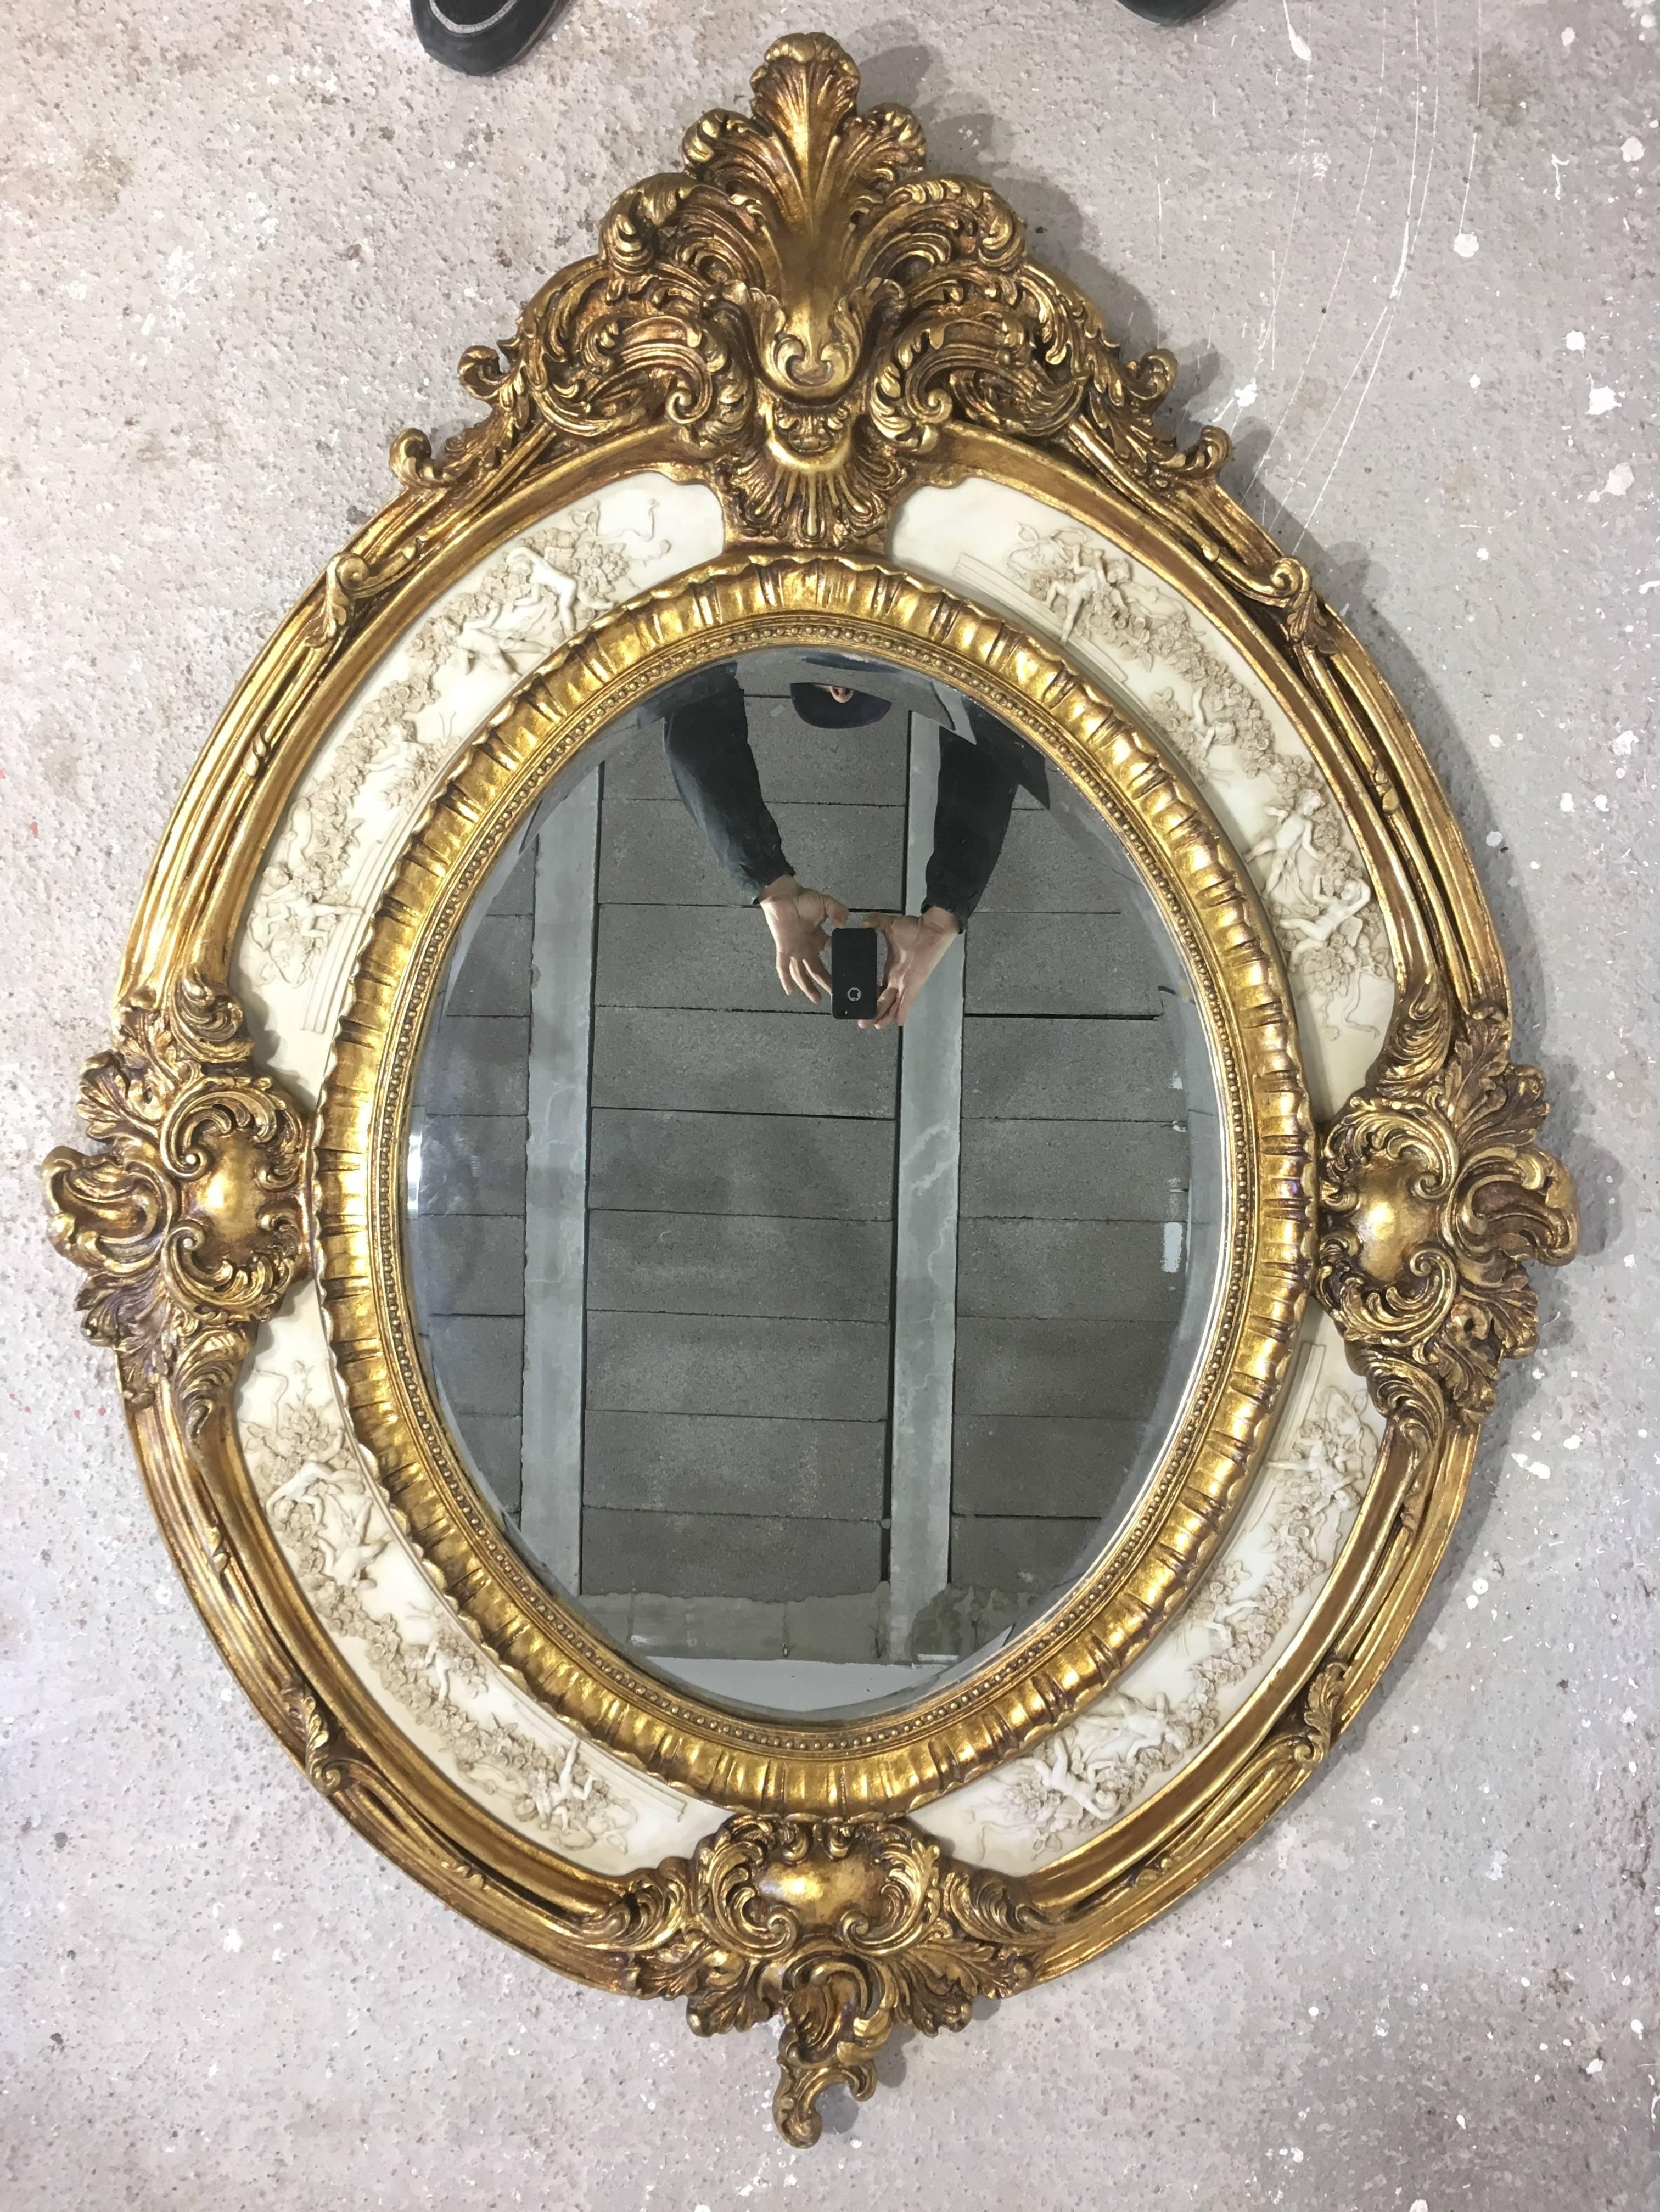 19th French Empire period gilt wood oval mirror with carved "marmolina"